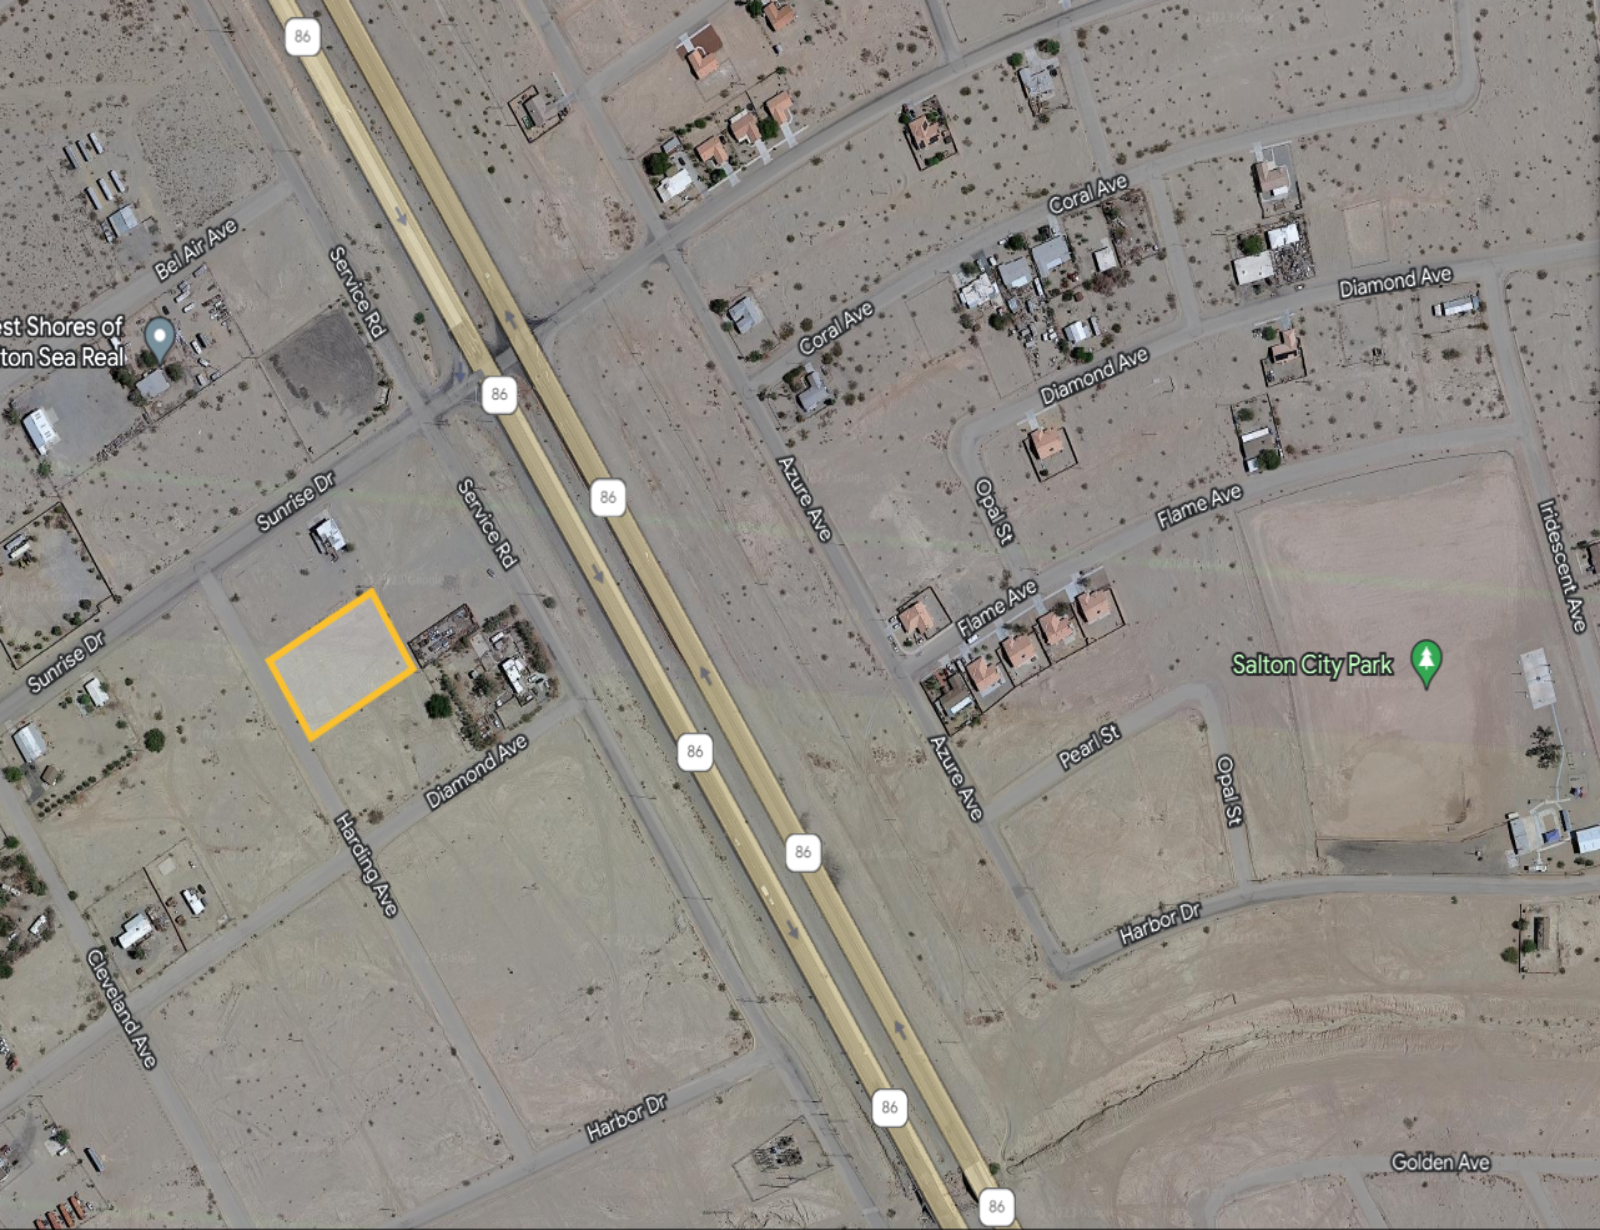 *NEW* LITHIUM VALLEY LOT!! LOW MONTHLY PAYMENTS!! 2204 Harding Ave., Salton City, CA 92275 APN: 014-064-005-000 - Get Land Today